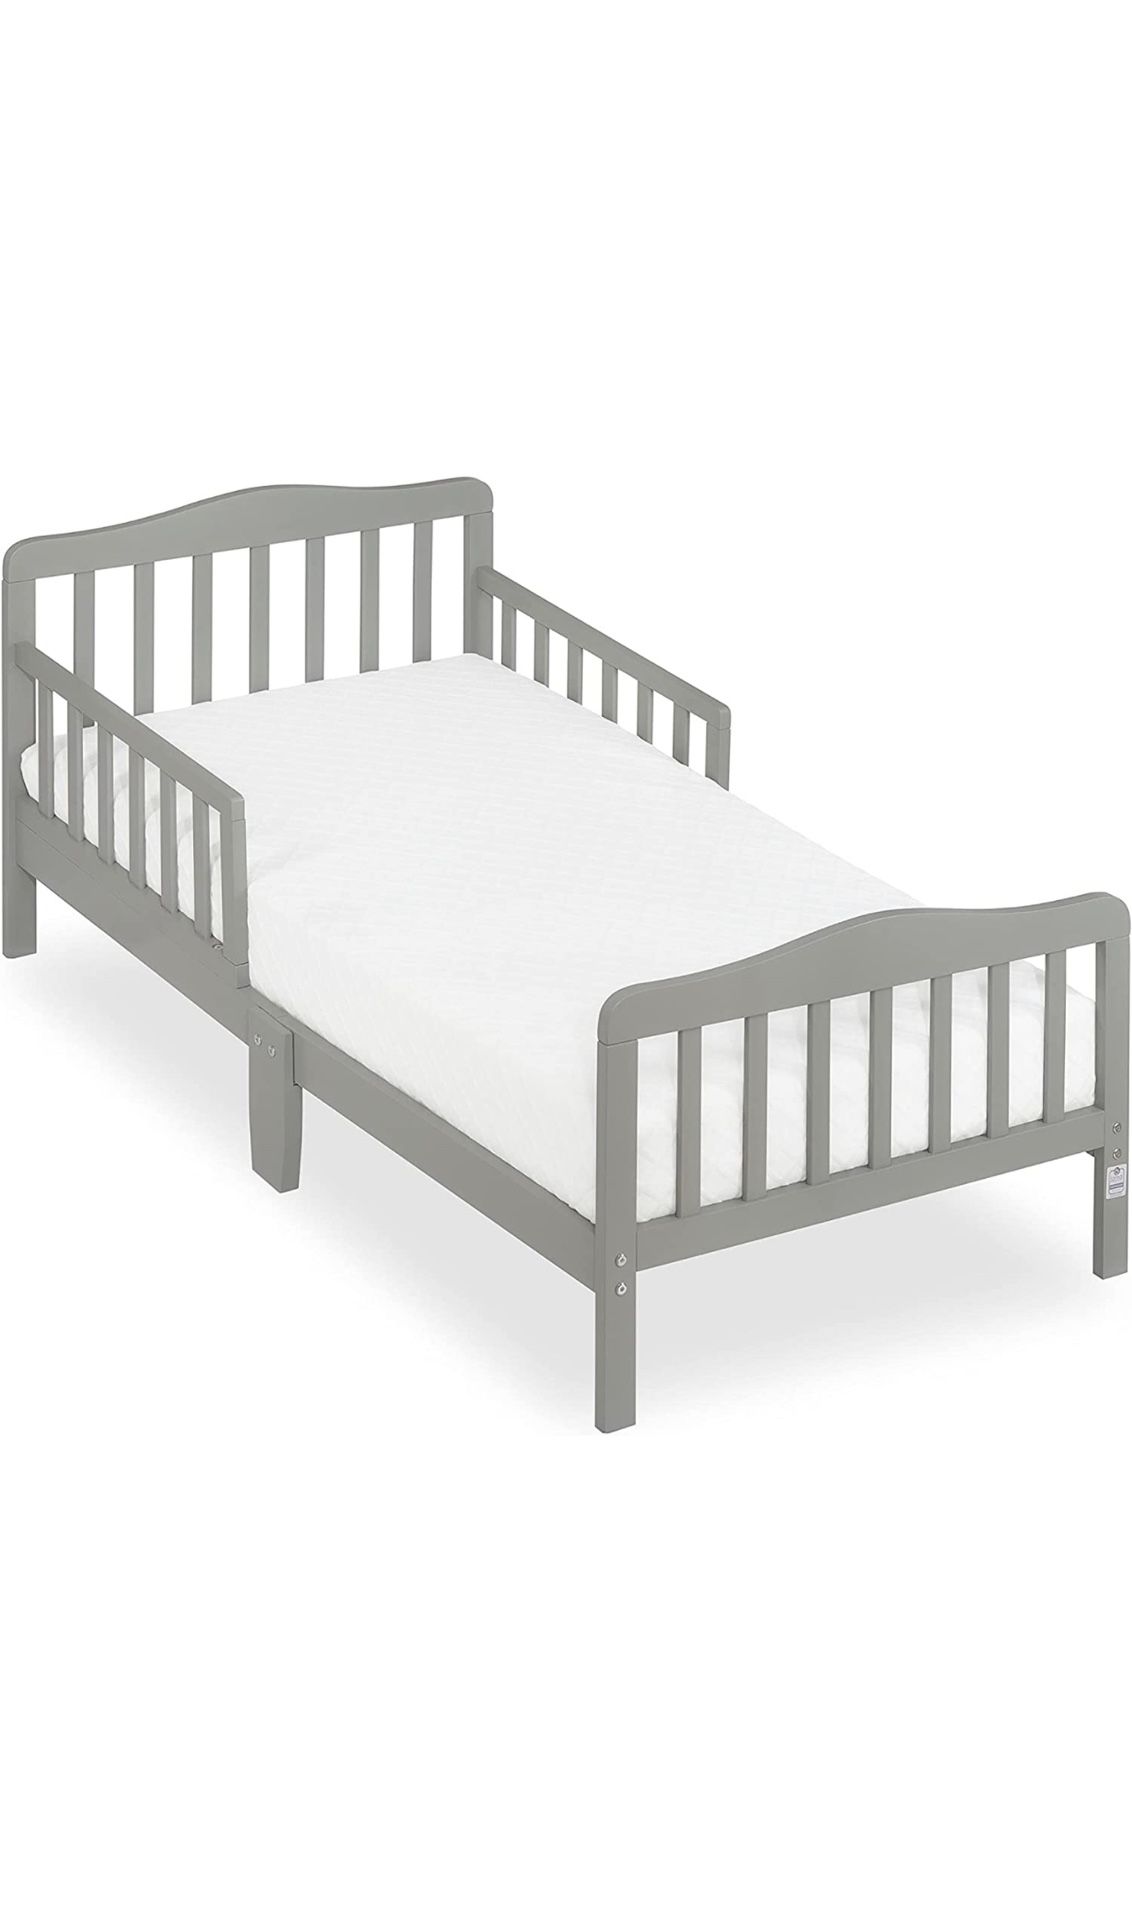 FREE Toddler Bed Bed frame Montessori Style Uses Crib Mattress 